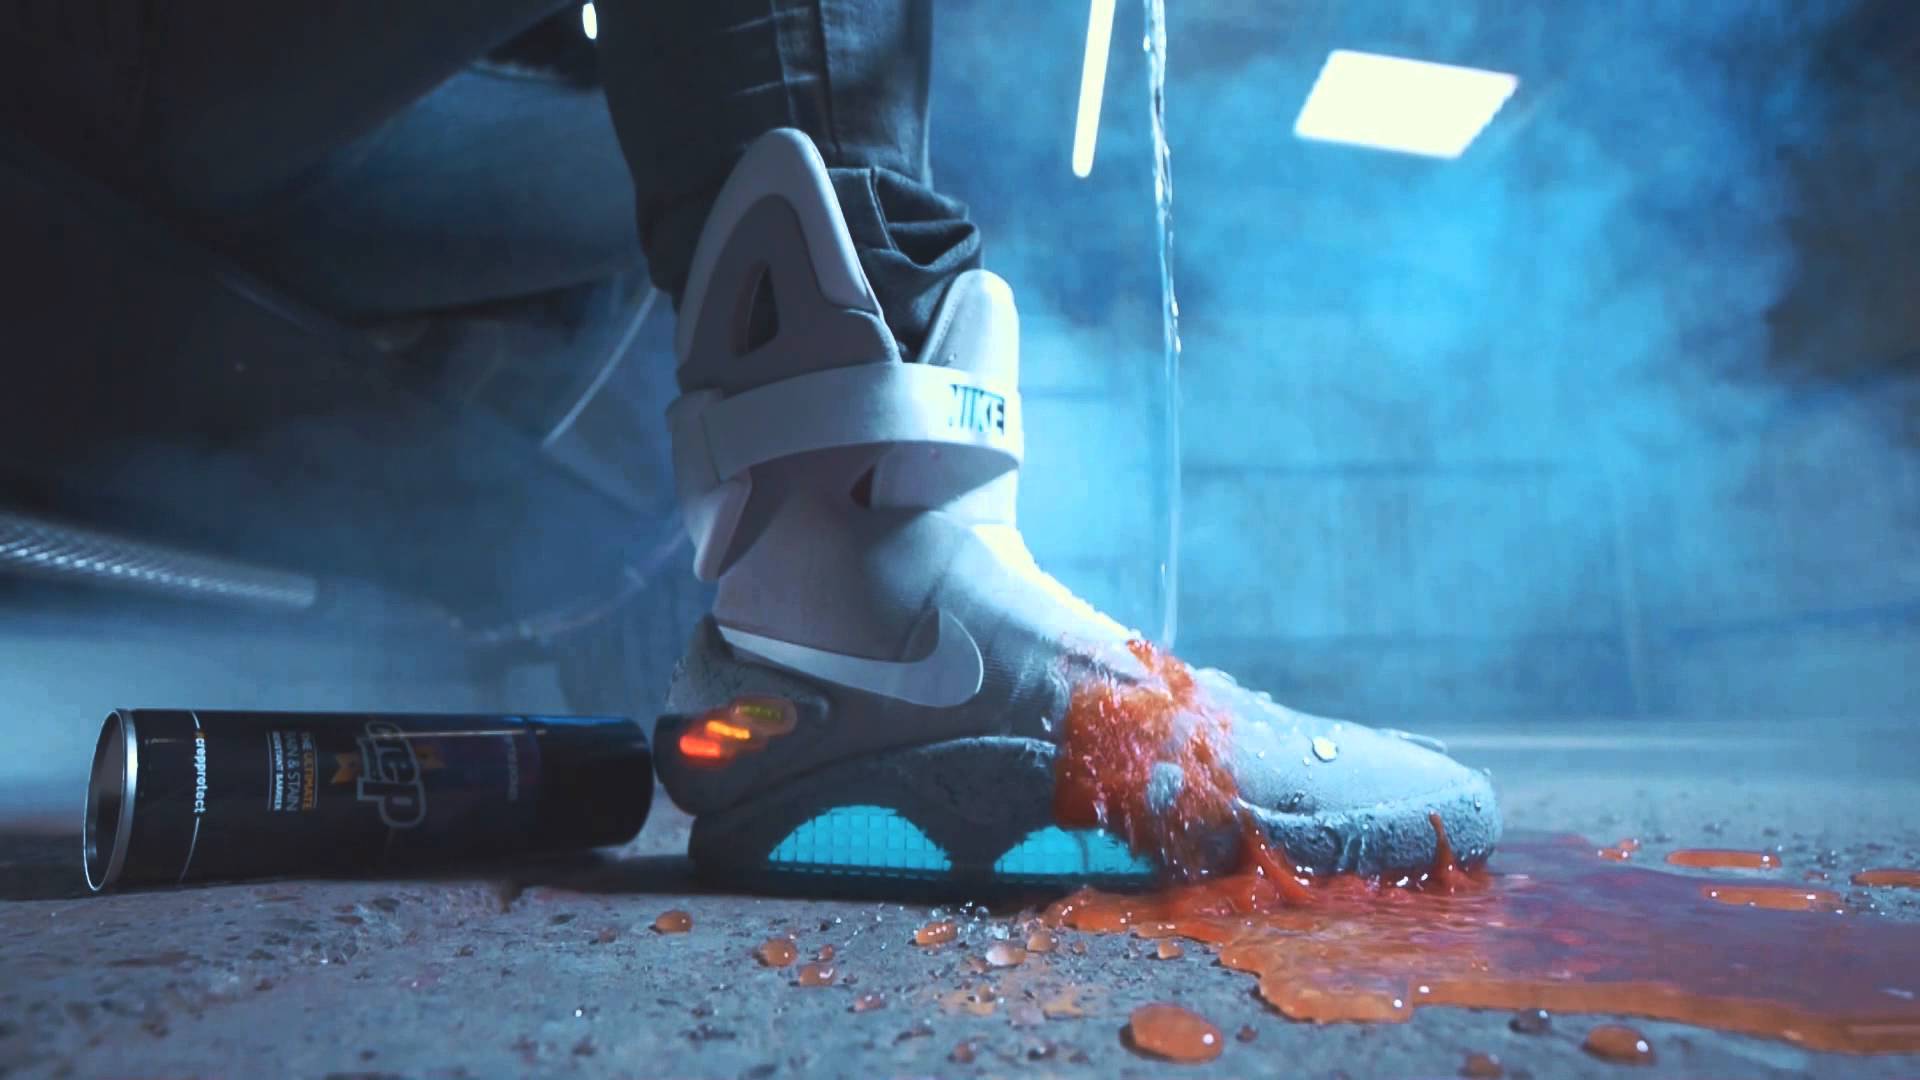 Crep Protect x Back to the Future x Nike Mags